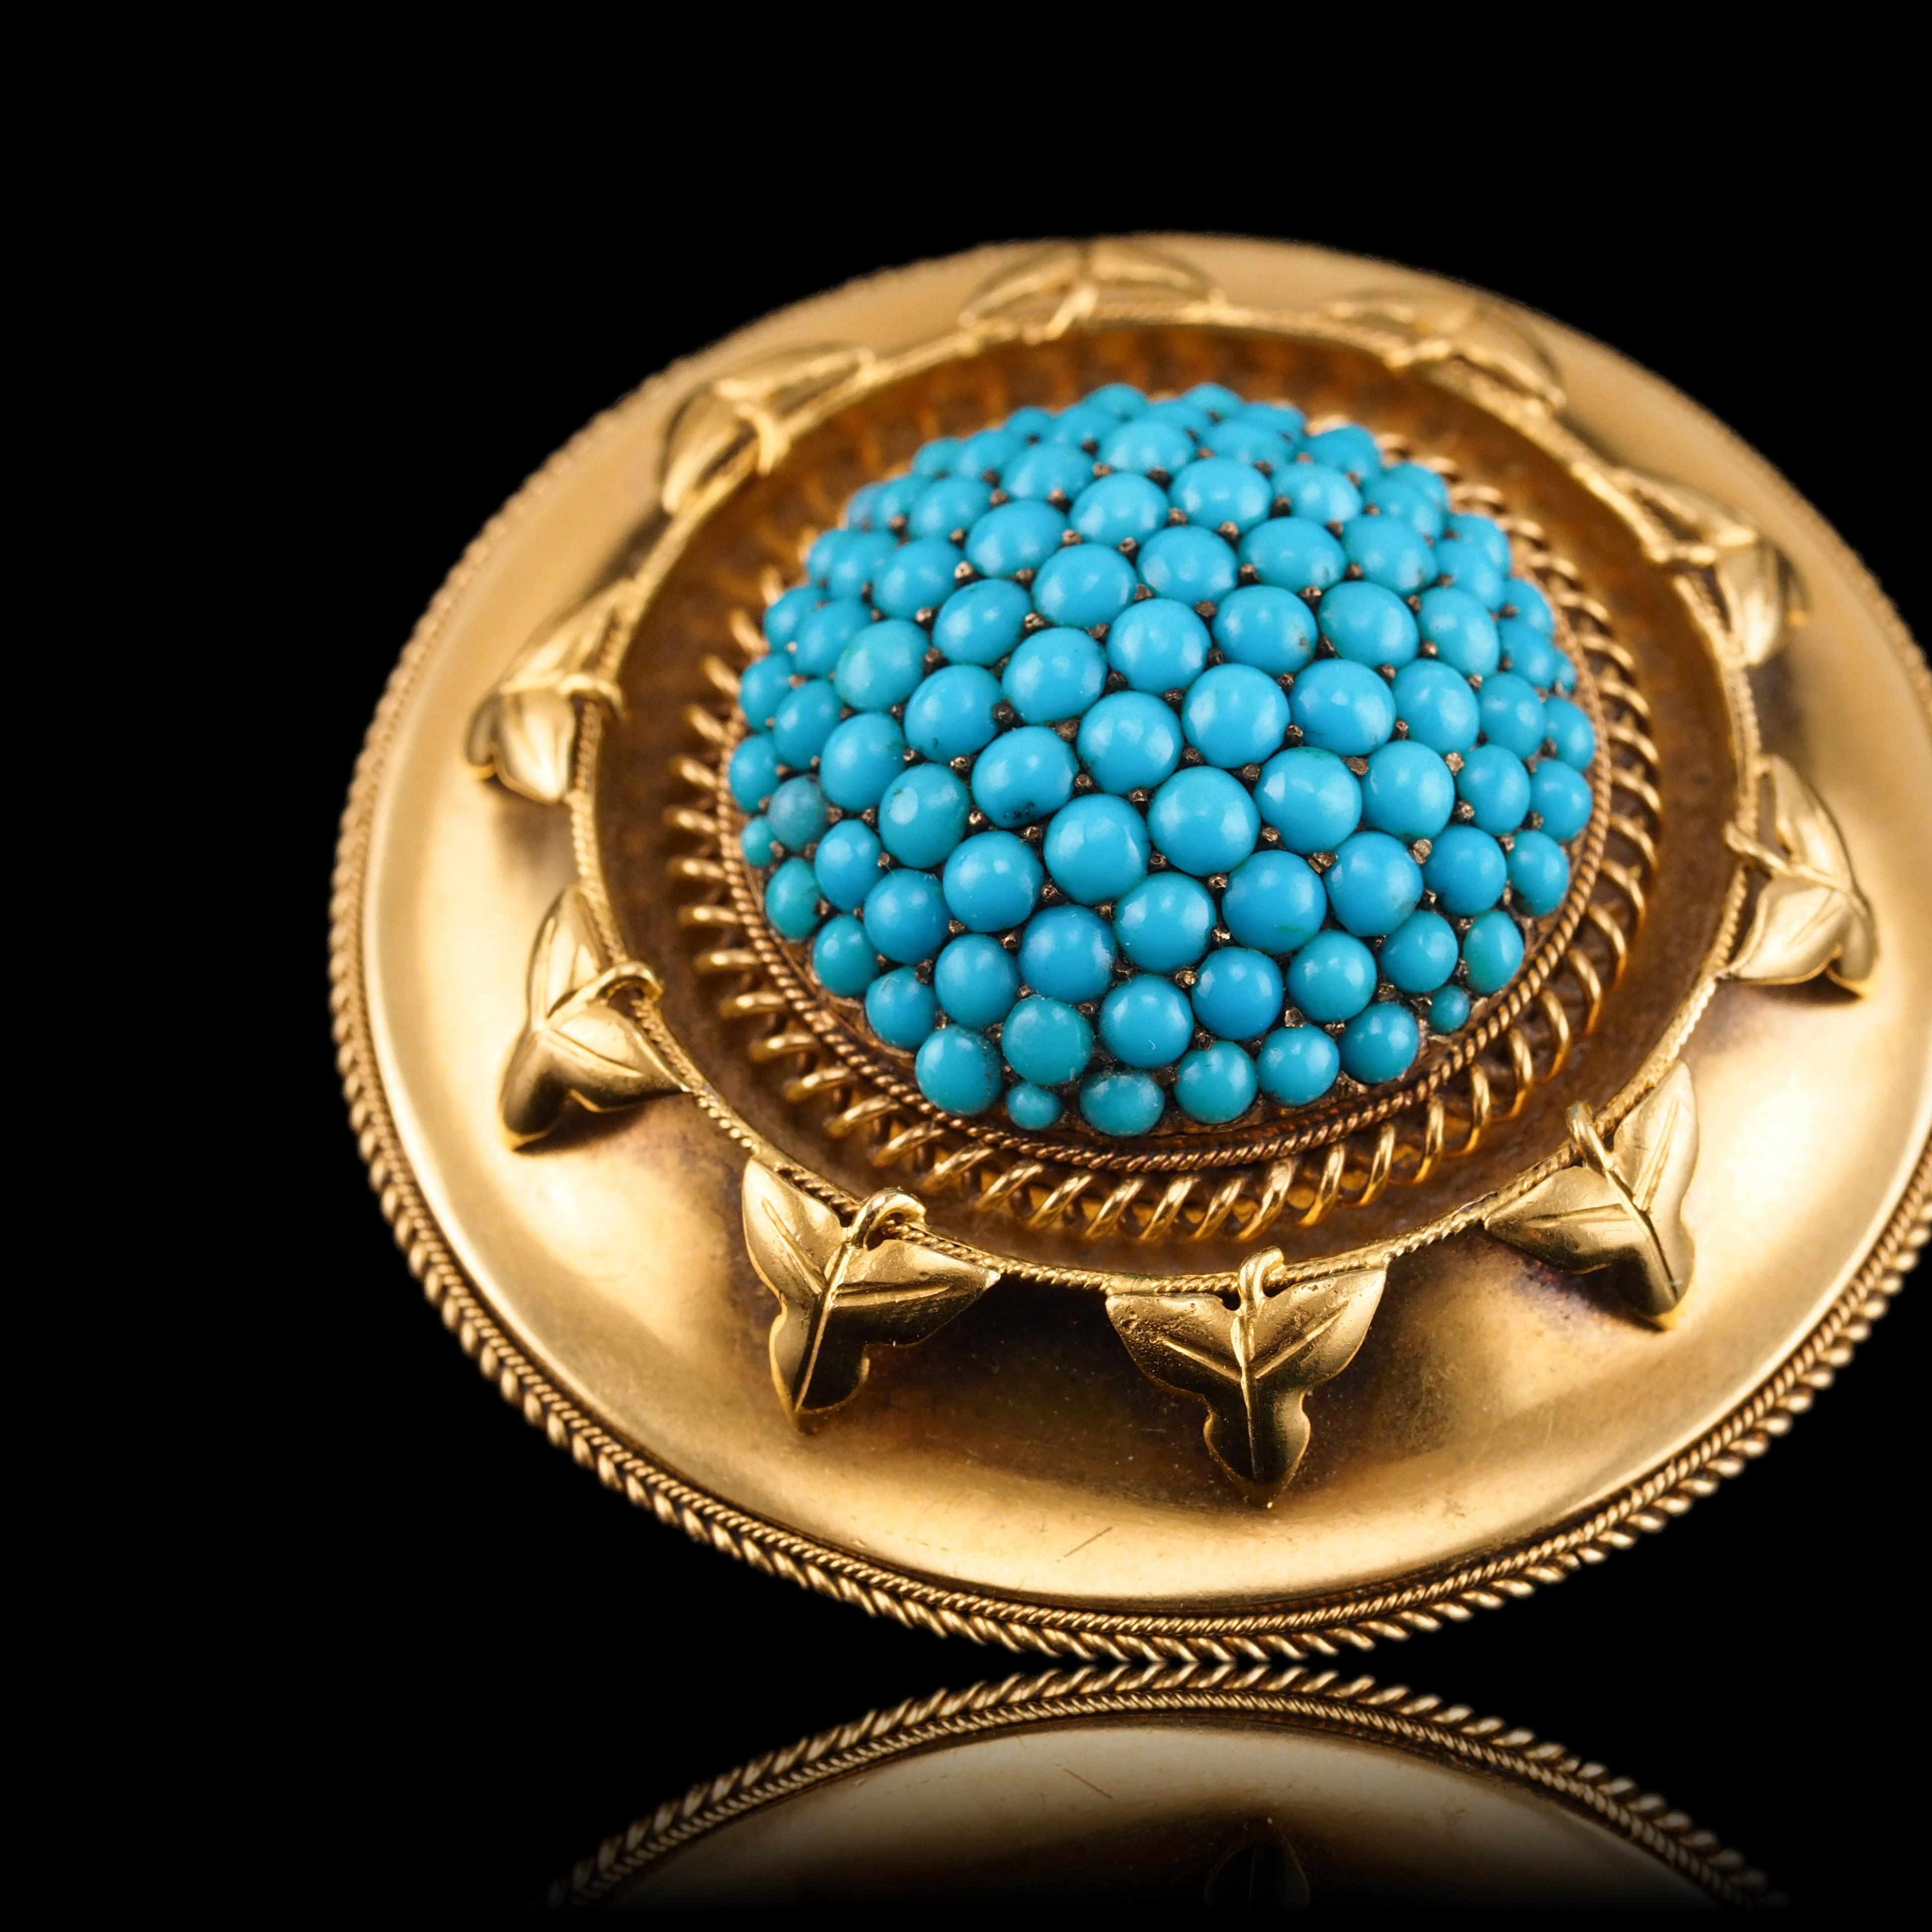 Antique Victorian Turquoise Pendant Necklace Brooch 18K Gold Etruscan c.1880 For Sale 7